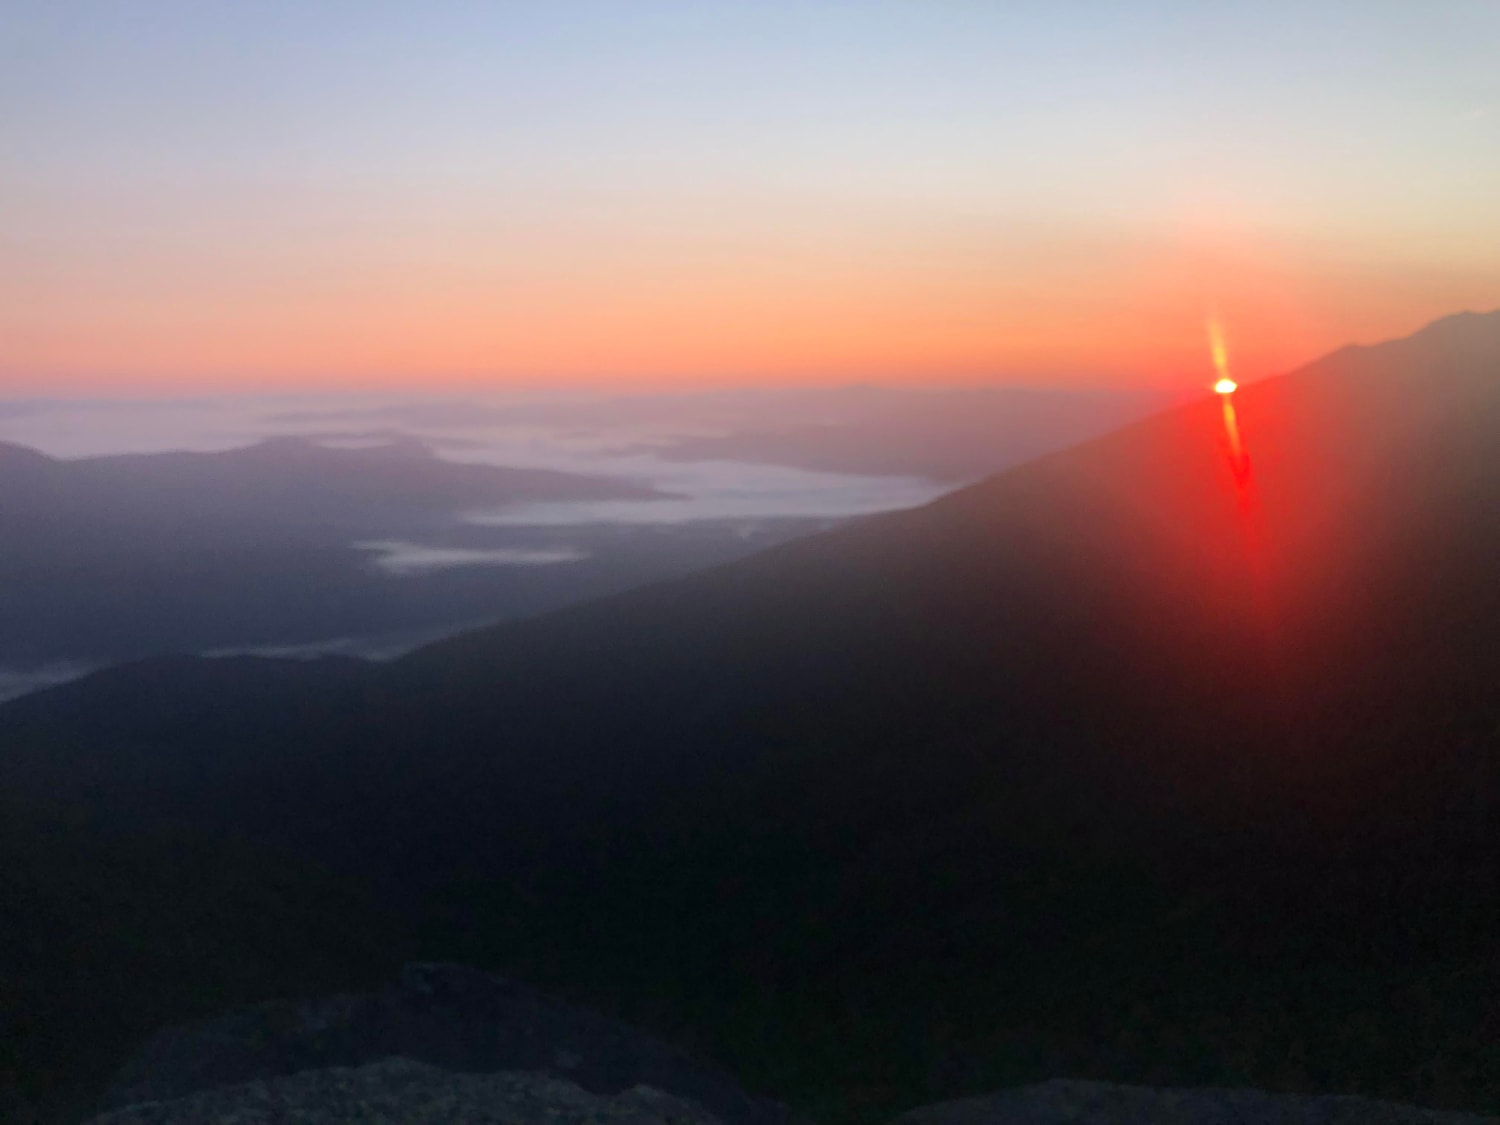 Sunrise Over Mount Madison New Hampshire. (Those are clouds not lakes!)